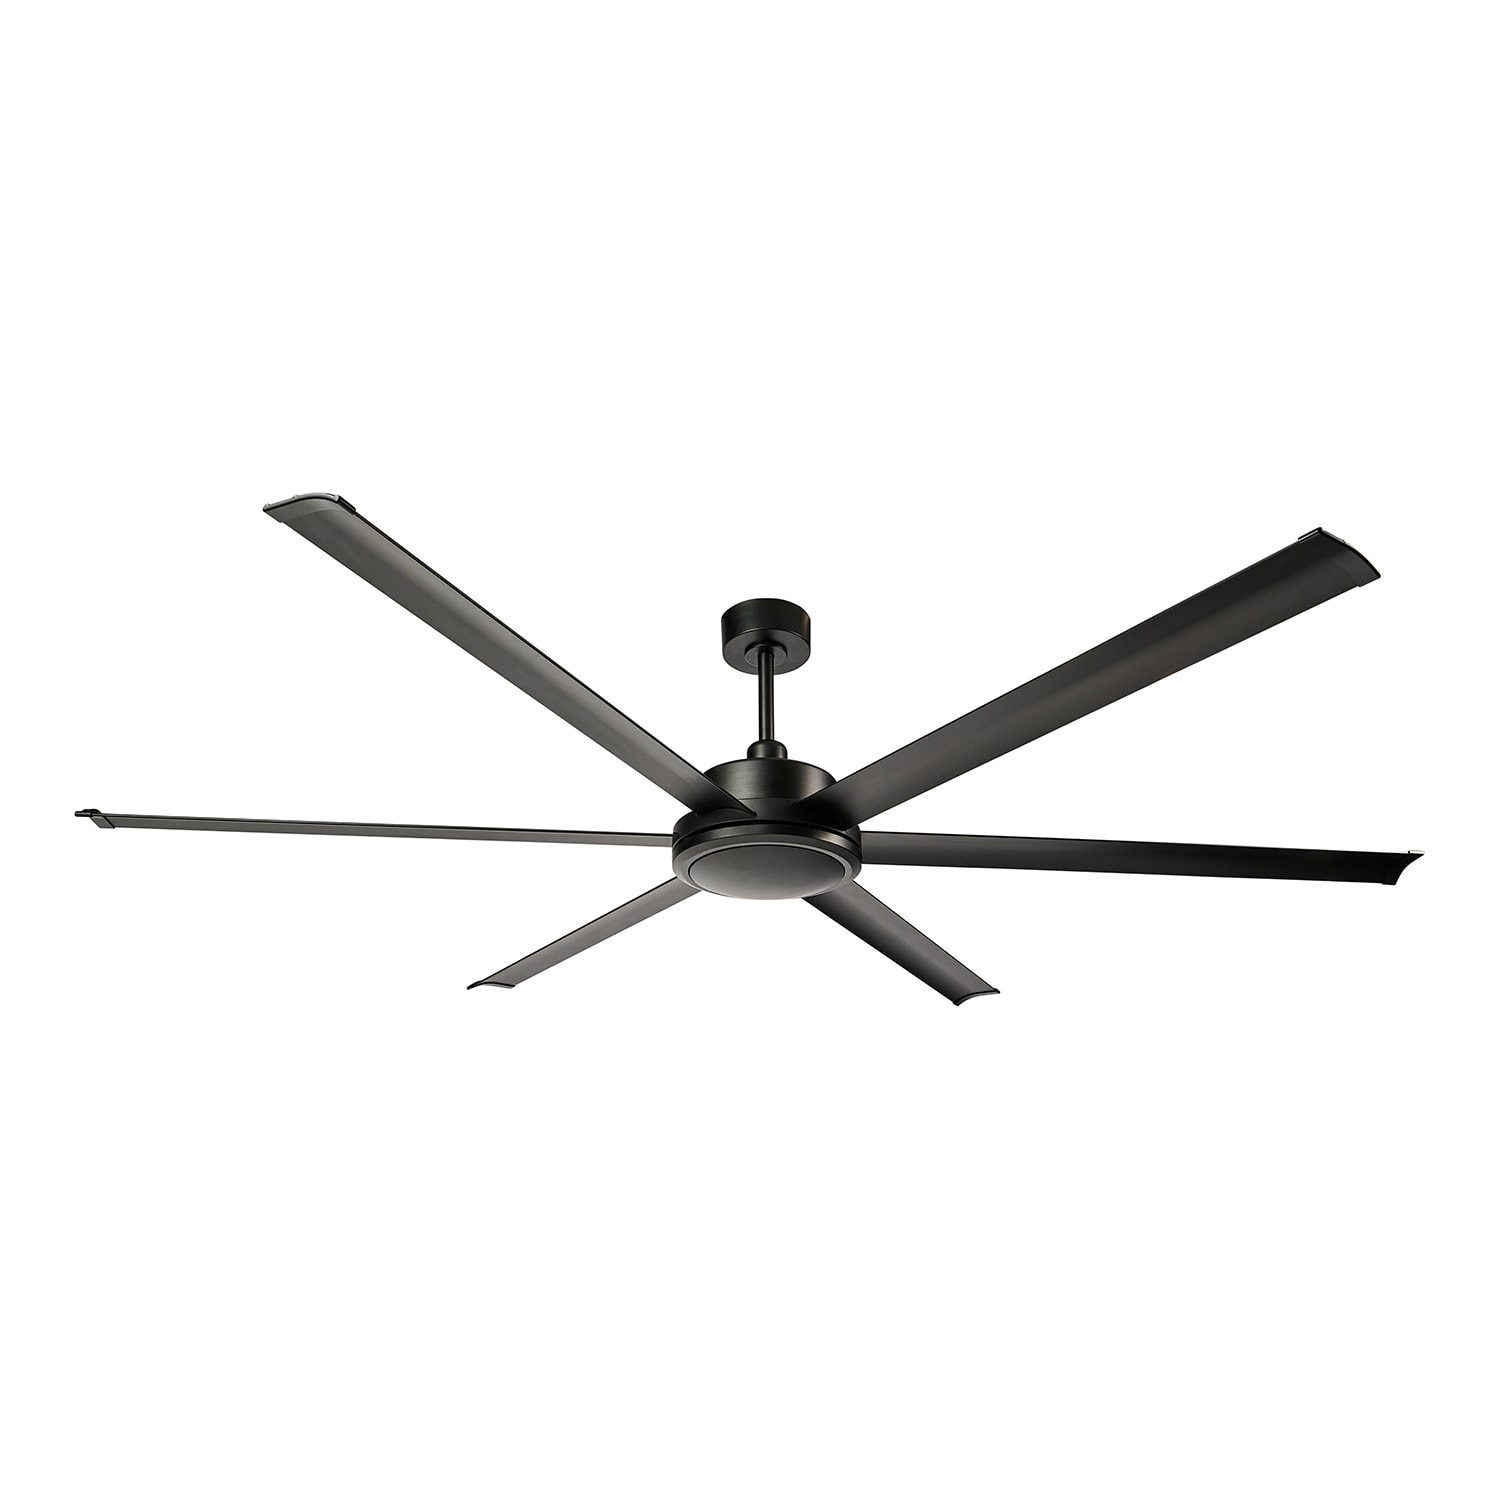 Product image of Colossus Huge 3m Wide DC Ceiling Fan 120 inch Black